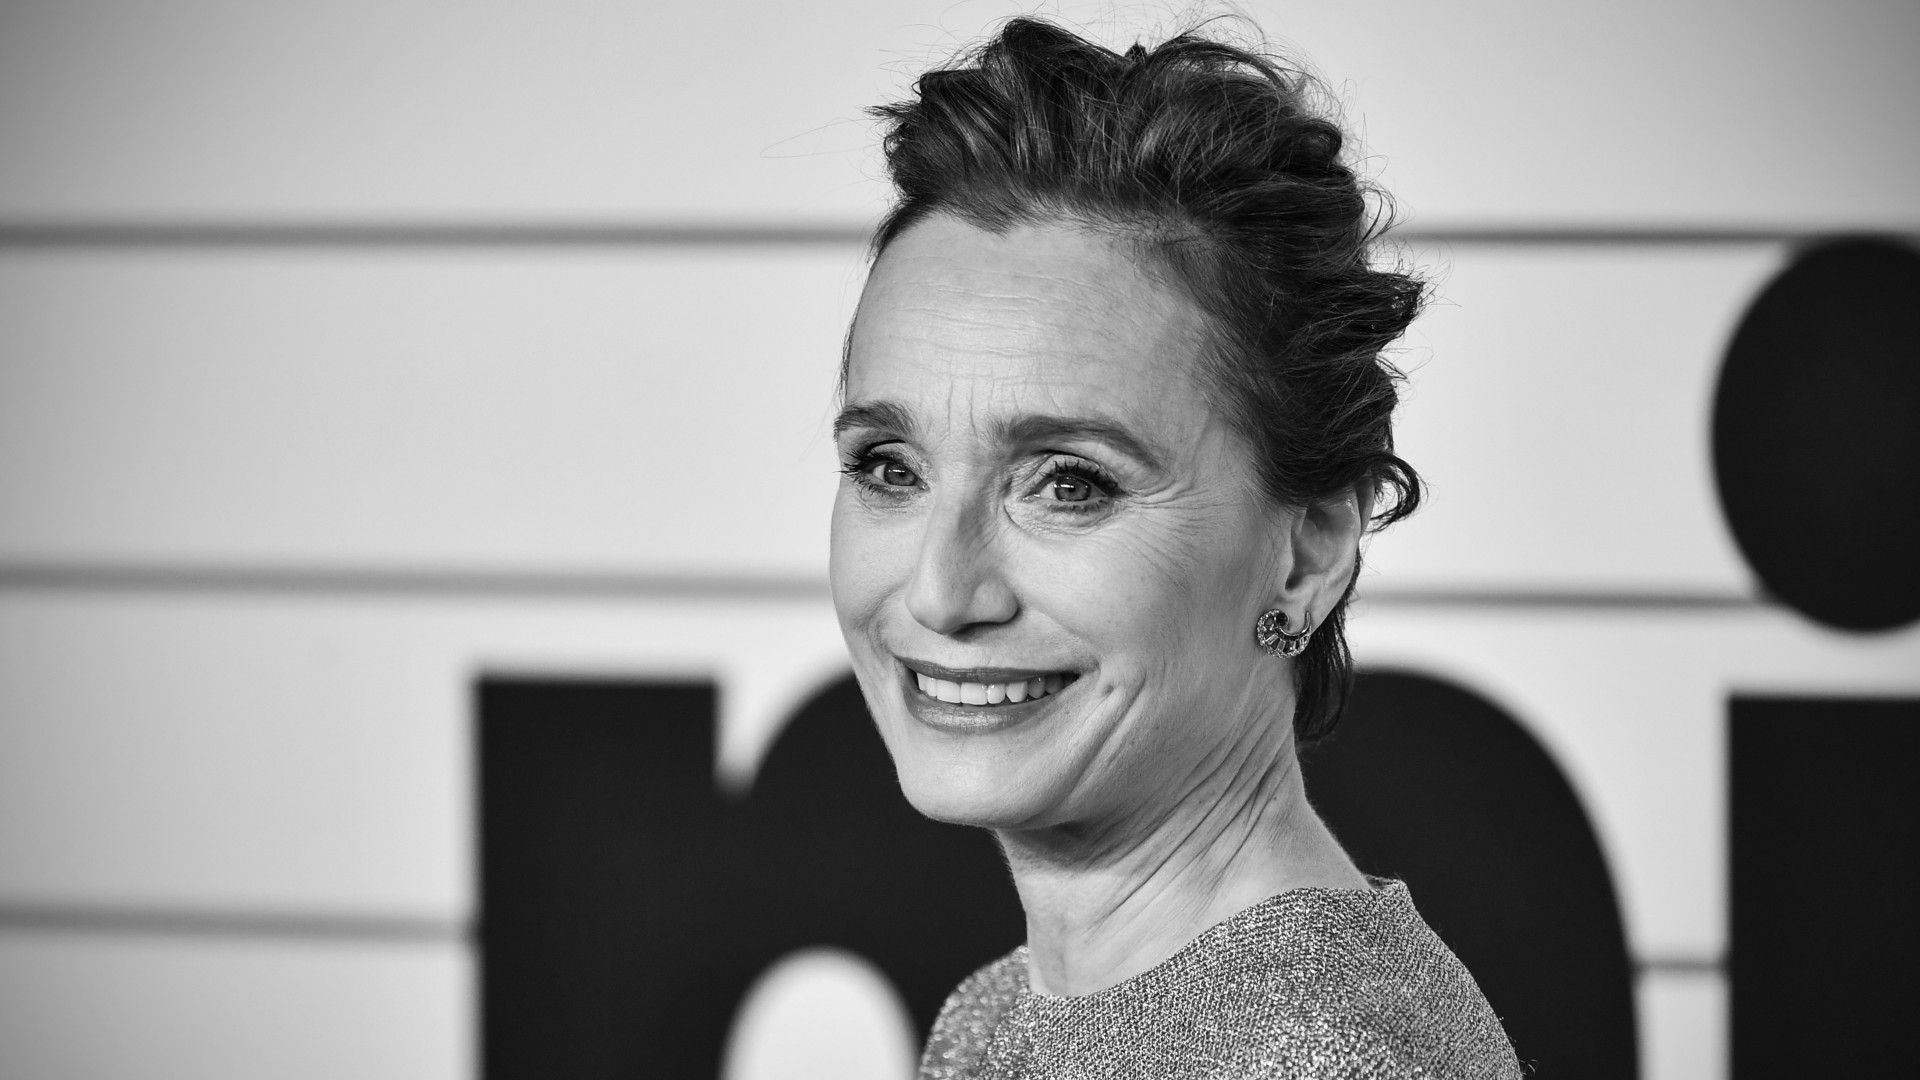 British Icon of the Week: Kristin Scott Thomas, the Actress Who Worked with Prince and Played a Queen